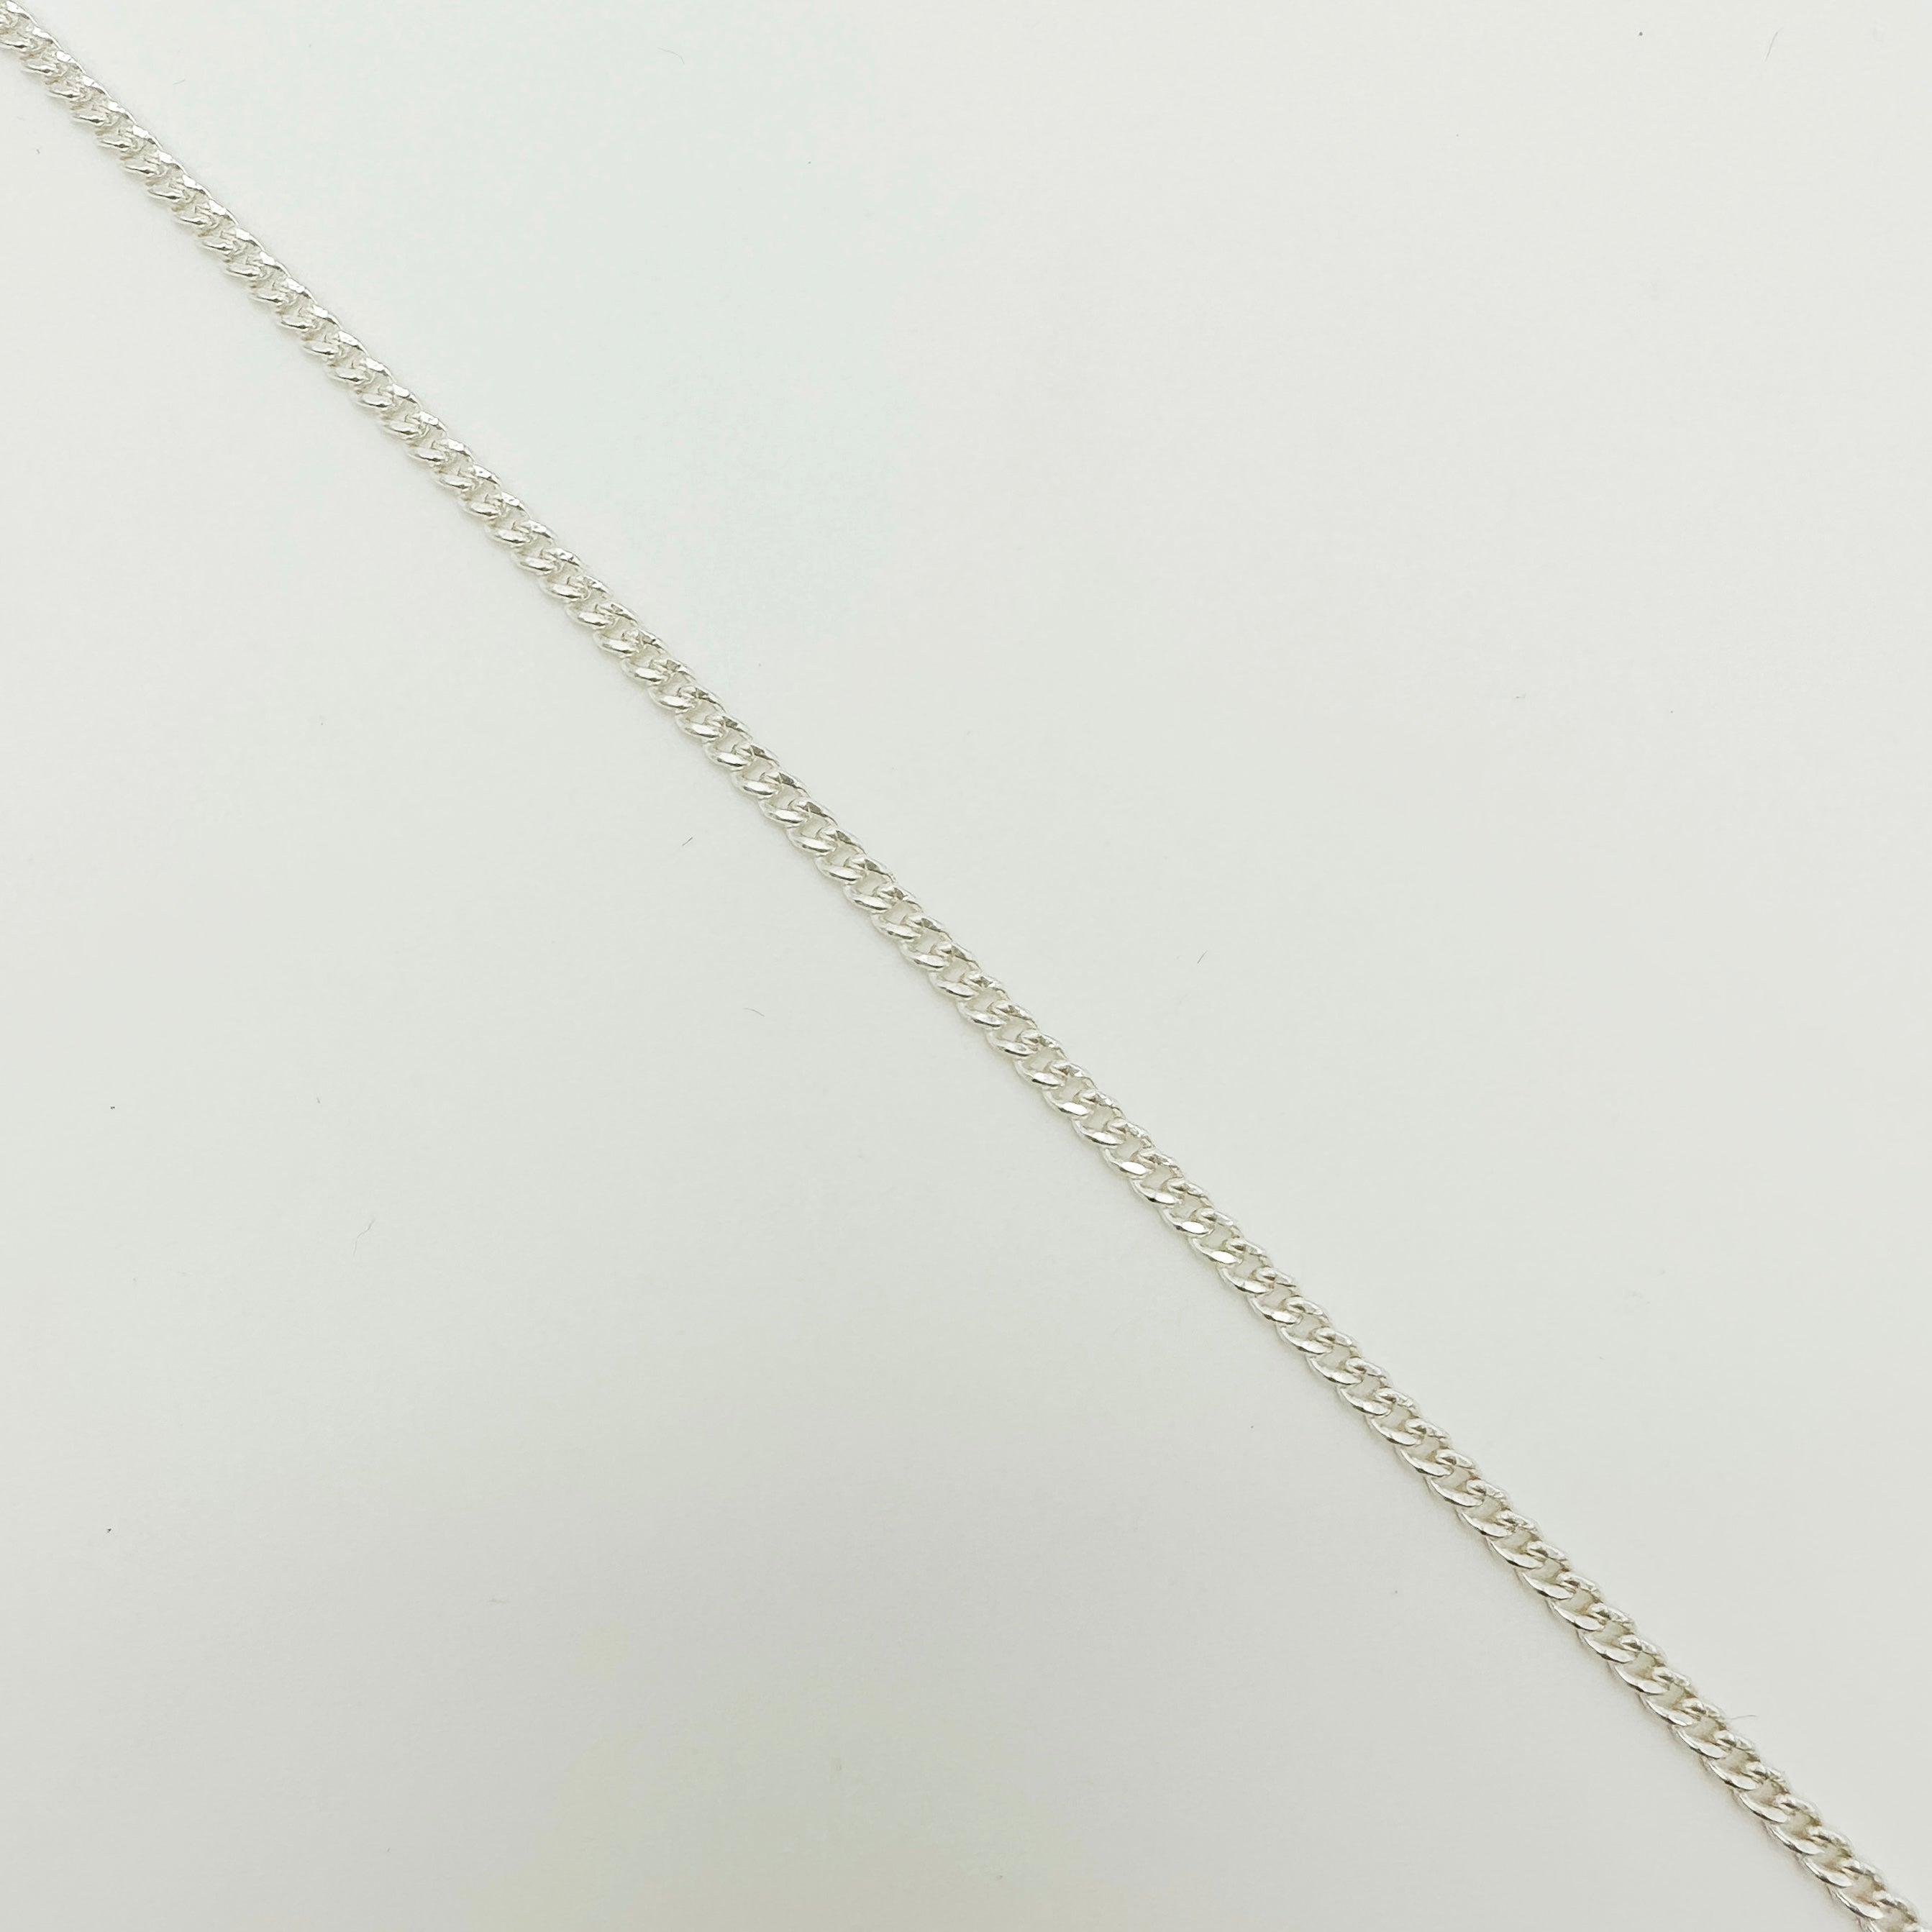 curb chain / sterling silver chain by the foot / wholesale chain / permanent jewelry supplies / sterling silver curb chain